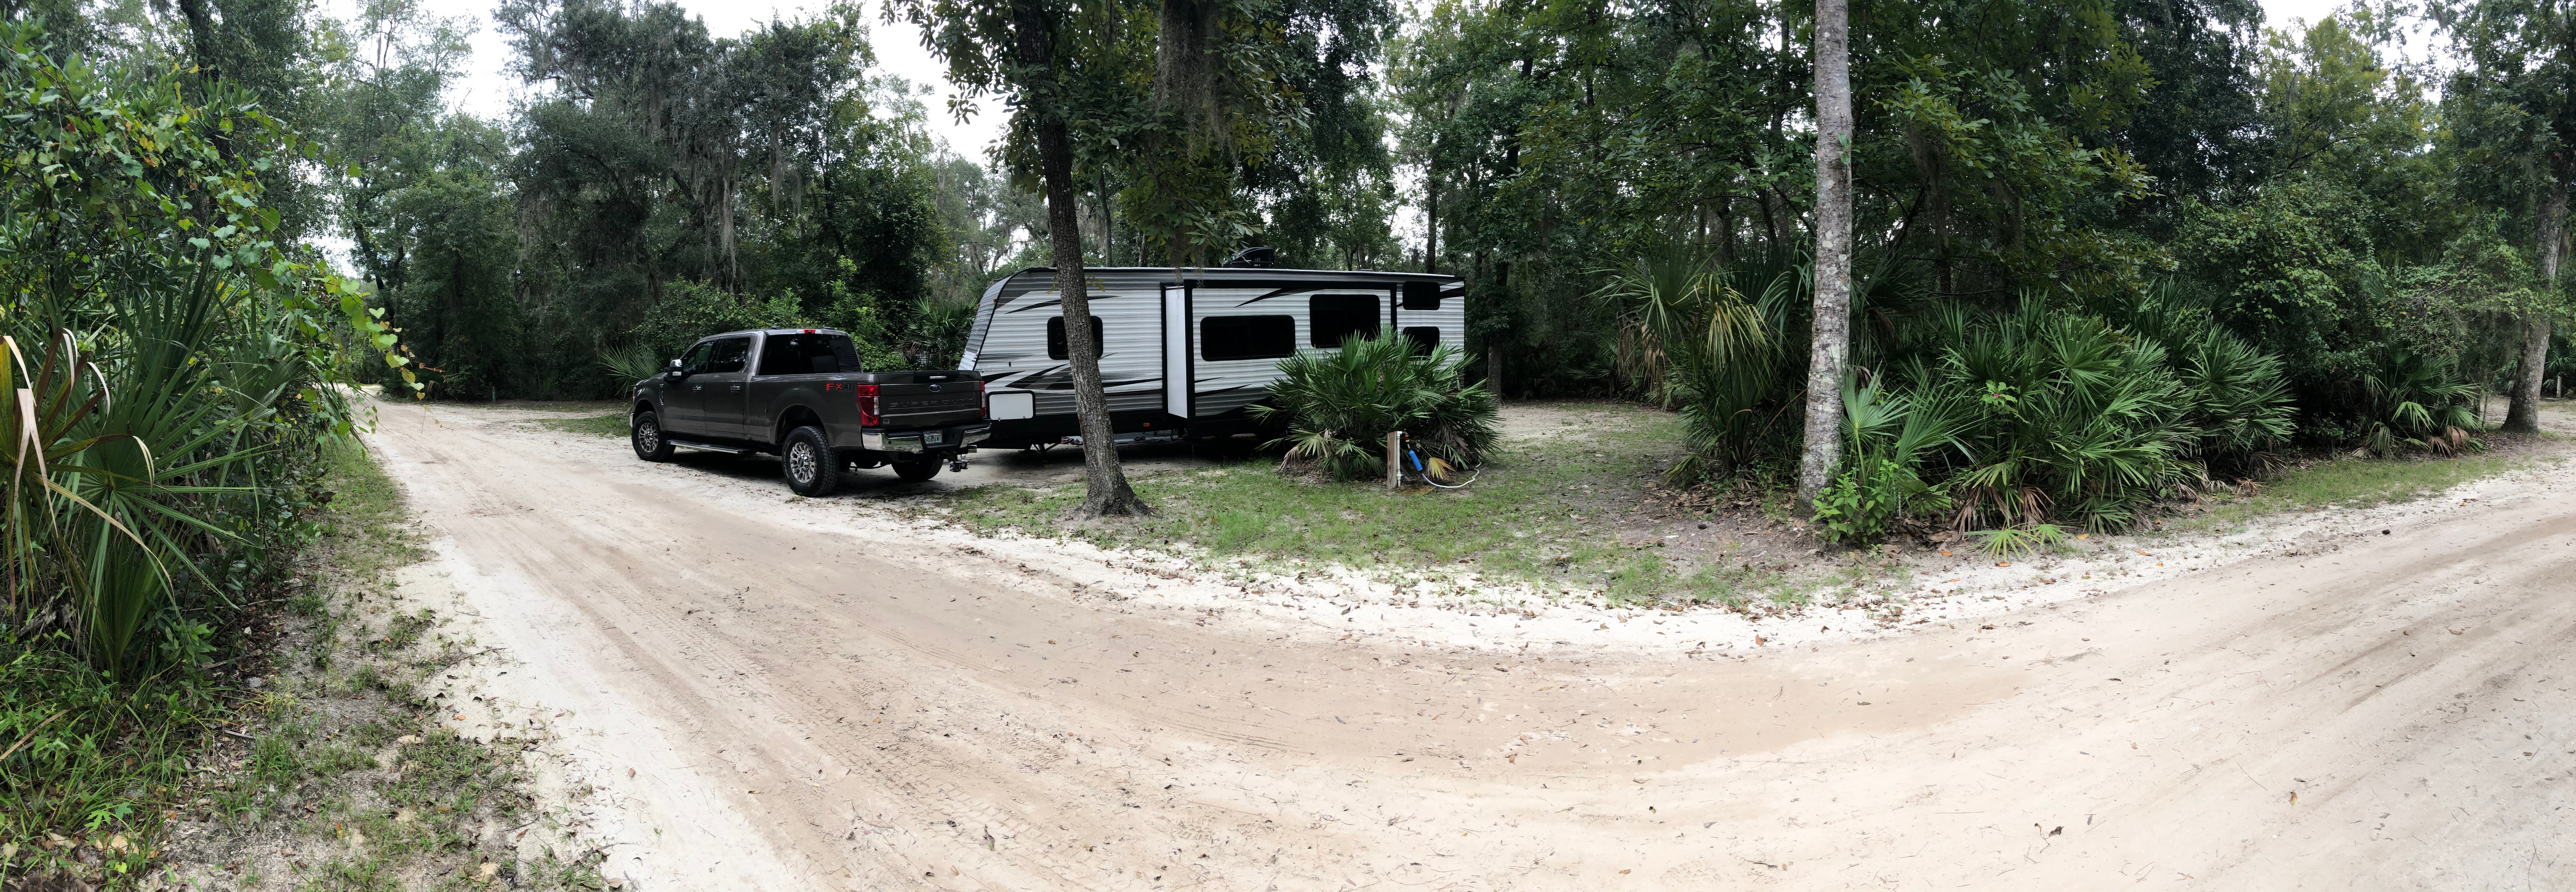 Camper submitted image from Faver-Dykes State Park Campground - 1